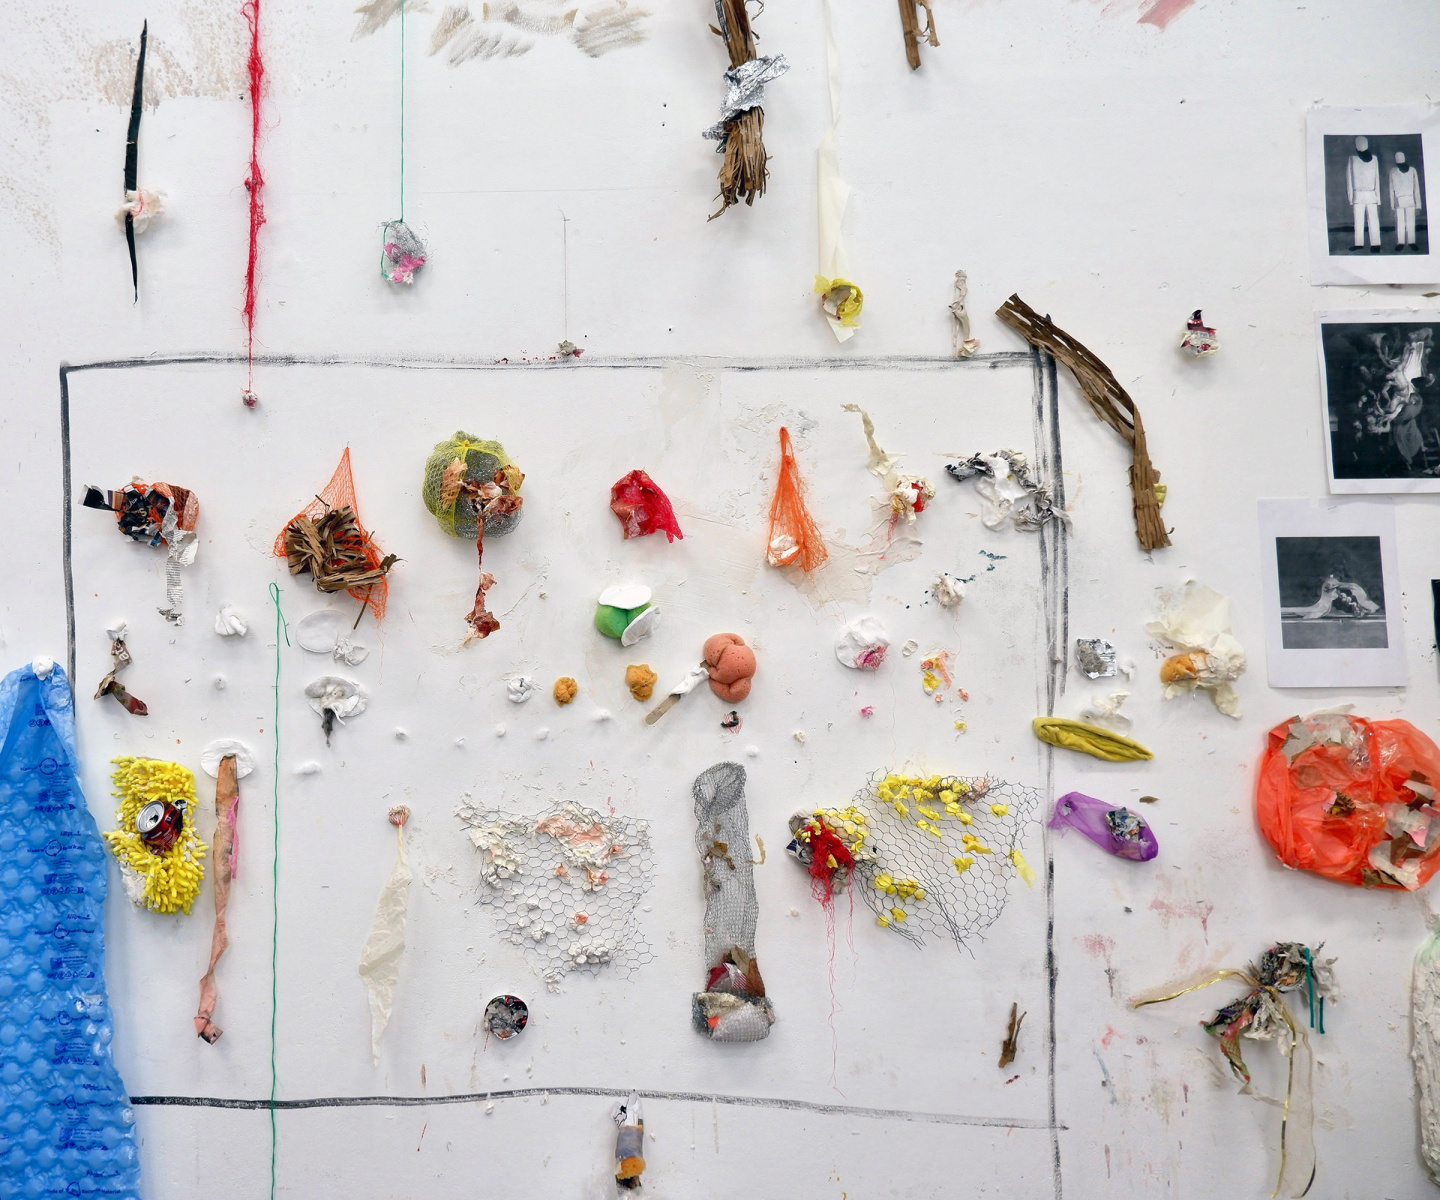 Studio wall with scraps paintings: fruit netting, cotton wool, sponges, scourer, chicken wire, newspaper, masking tape, paper packaging, hairband, can, string, tissue paper, white tack, adhesive plaster, towel, wooden fork.